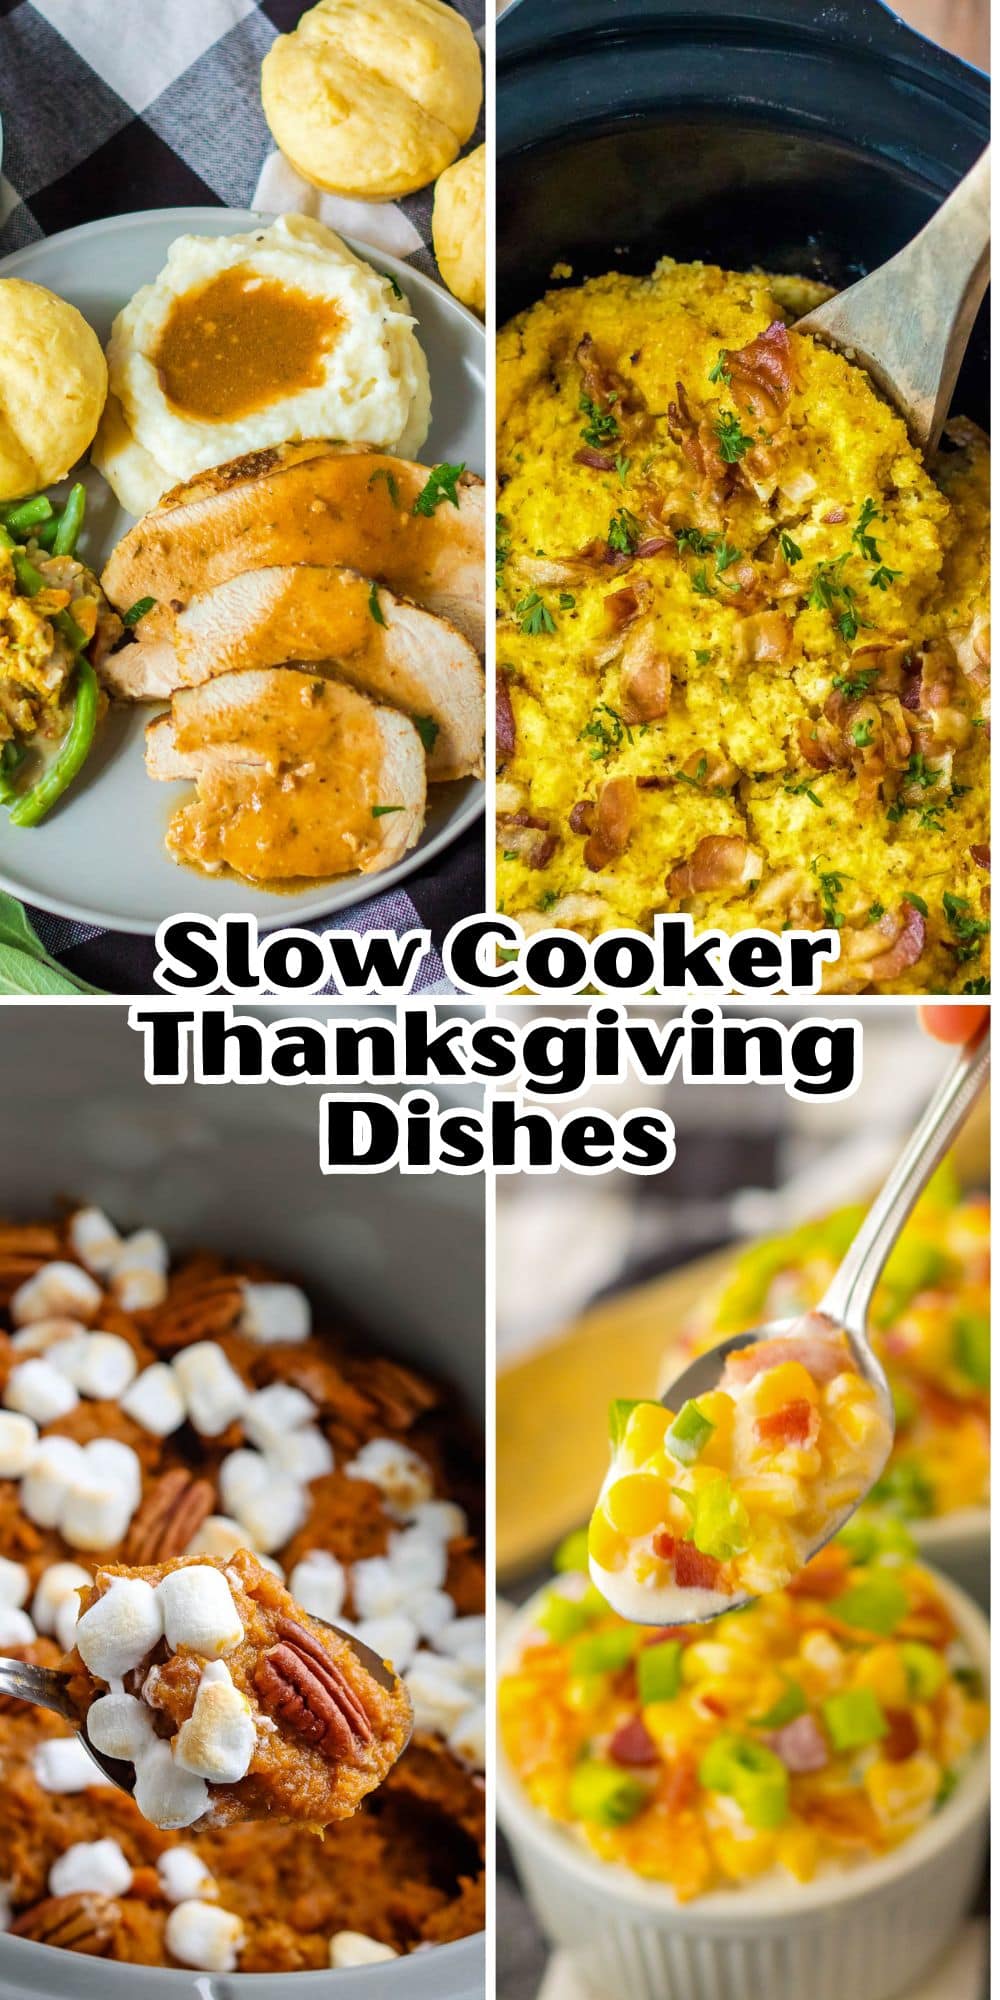 Slow cooker thanksgiving dishes.